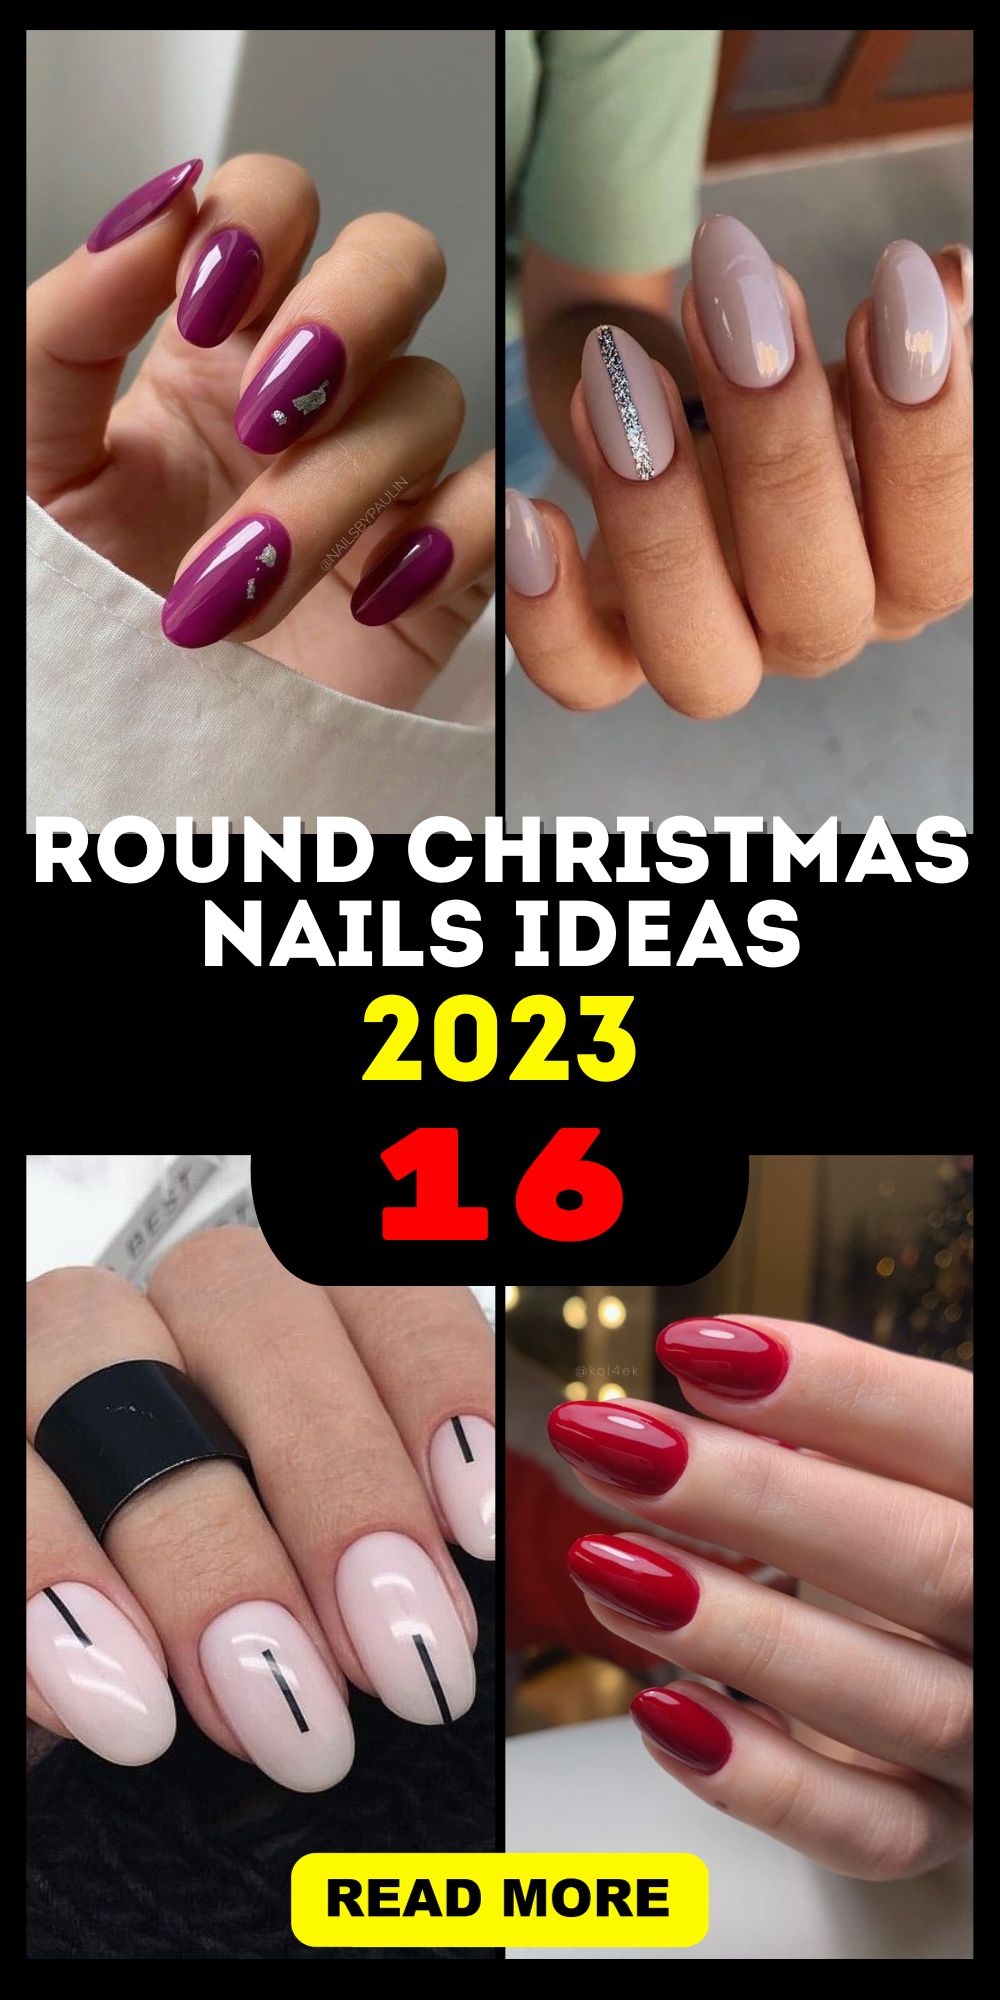 Explore 2023 Round Christmas Nails: Trends, Art Designs, and More